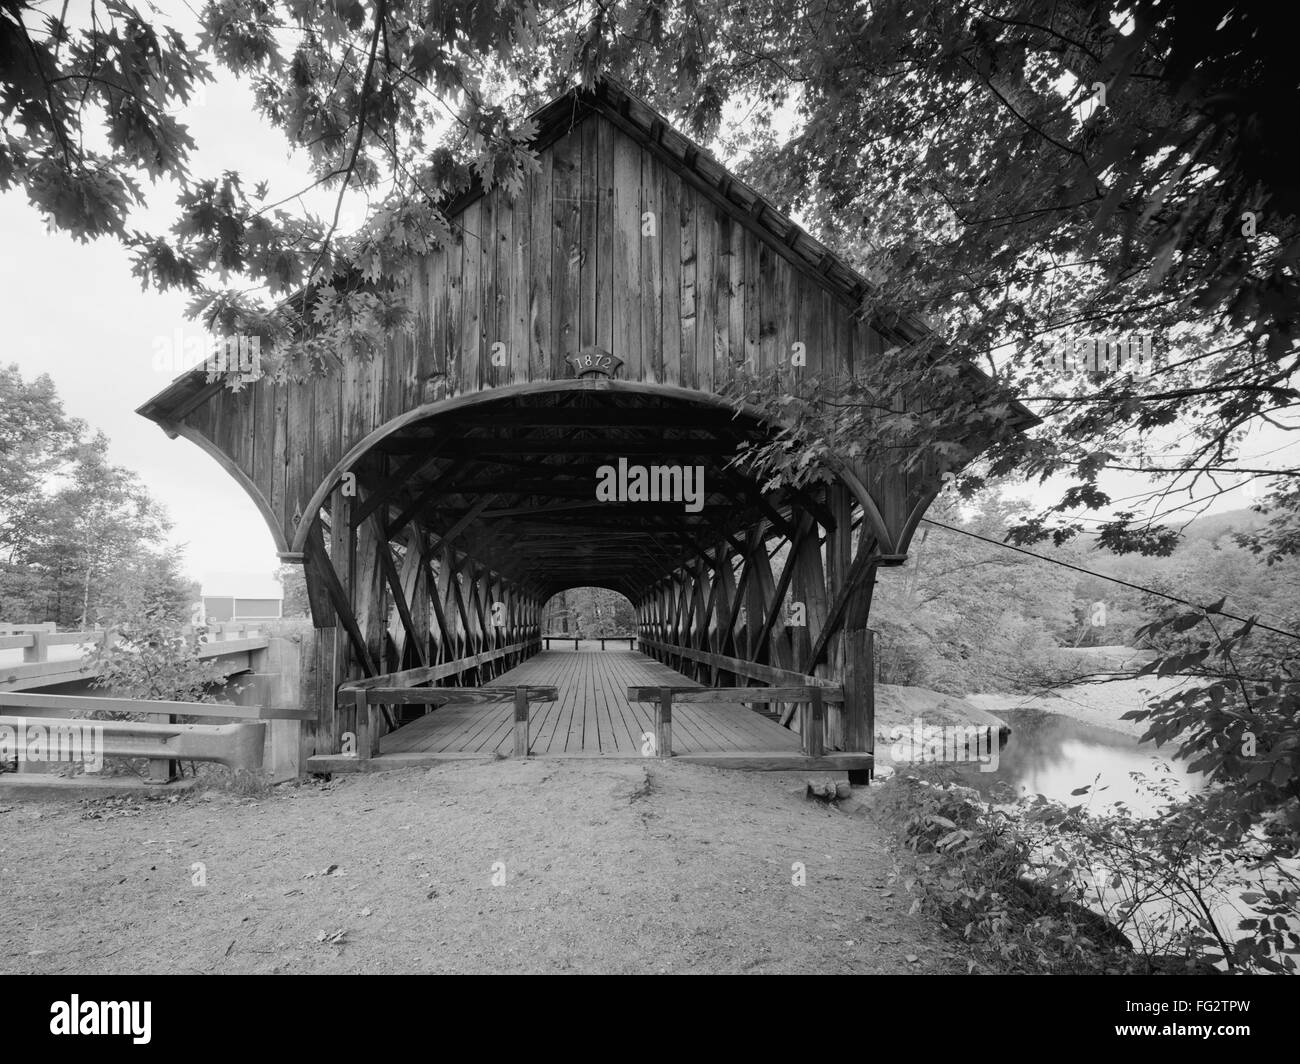 MAINE: COVERED BRIDGE, 2003. /nSunday River Bridge over the Sunday River in Oxford County, Maine. Photograph by Jet Lowe, 2003. Stock Photo